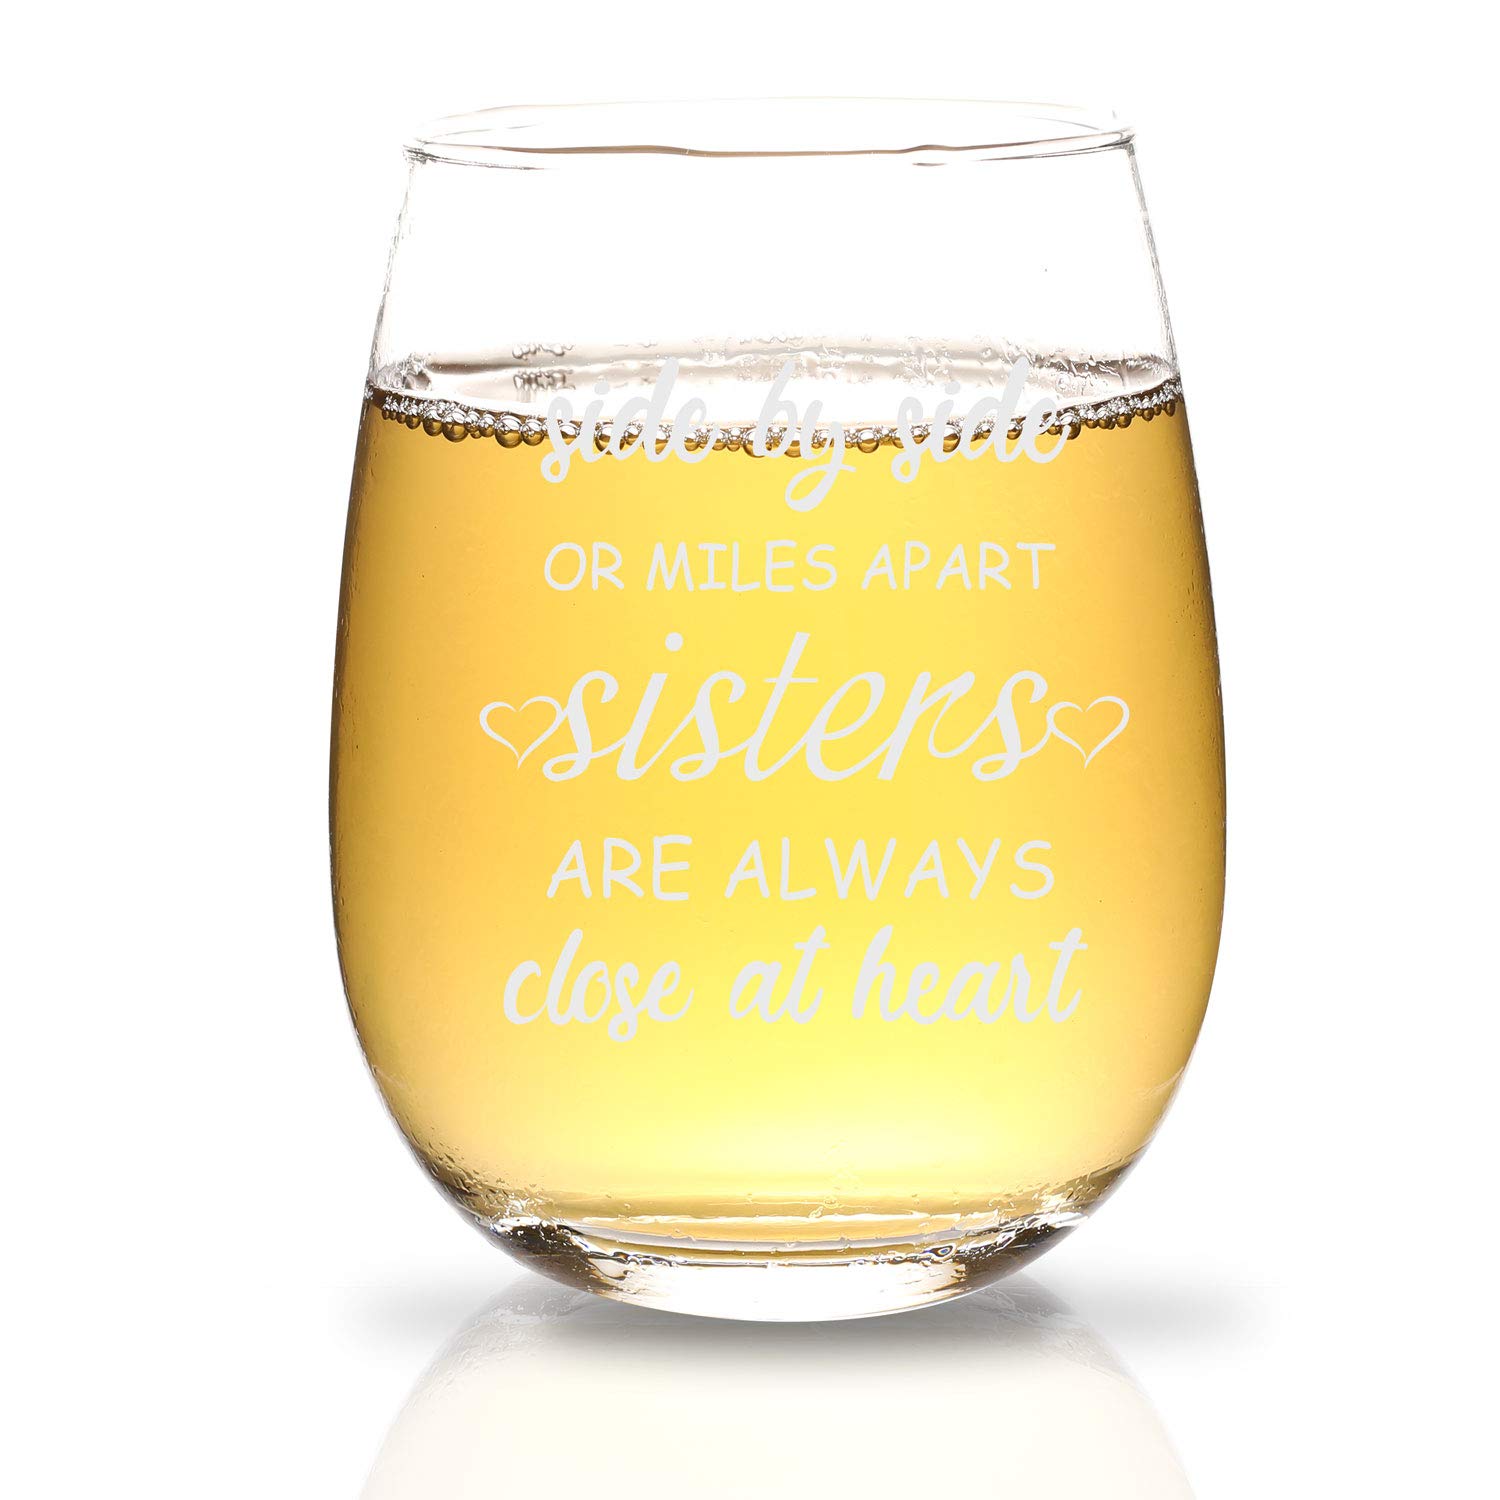 KFK Sister Gifts from Sister -15oz Wine Glass Birthday Gift for Sisters, Best Sister,Mother's Day, Christmas Ideas for Big Sister, Little Sister